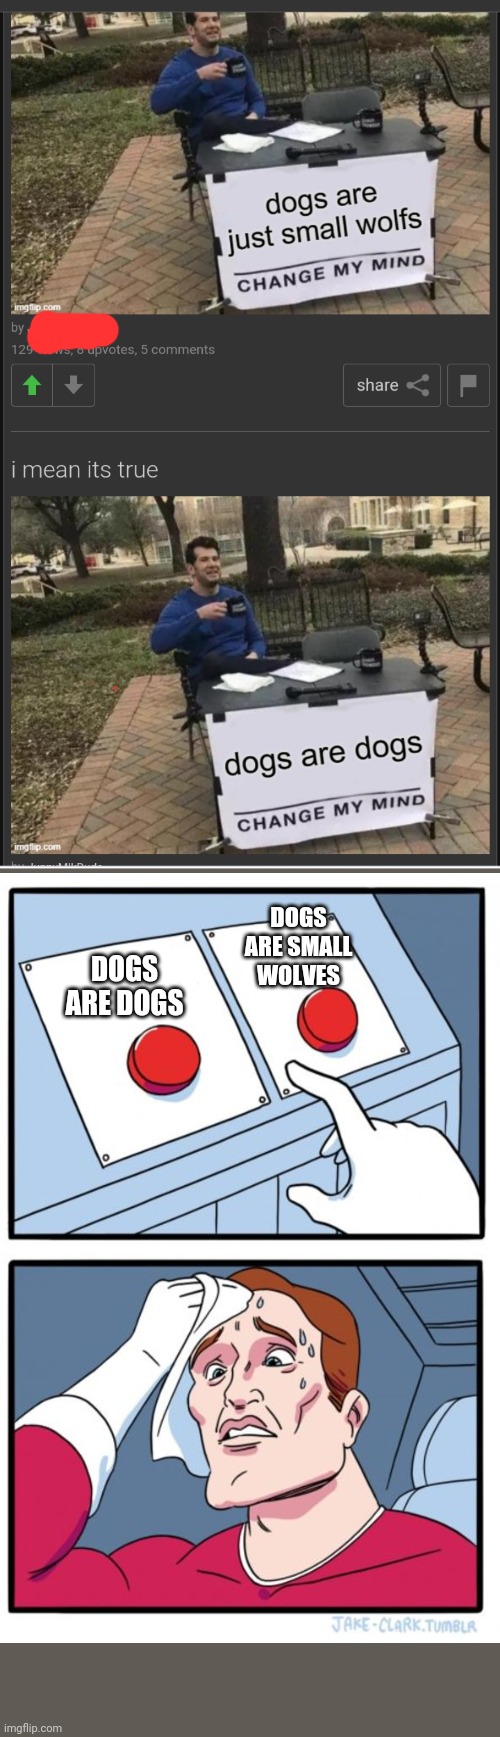 ? Both are right? | DOGS ARE SMALL WOLVES; DOGS ARE DOGS | image tagged in dogs,memes,funny memes,two buttons | made w/ Imgflip meme maker